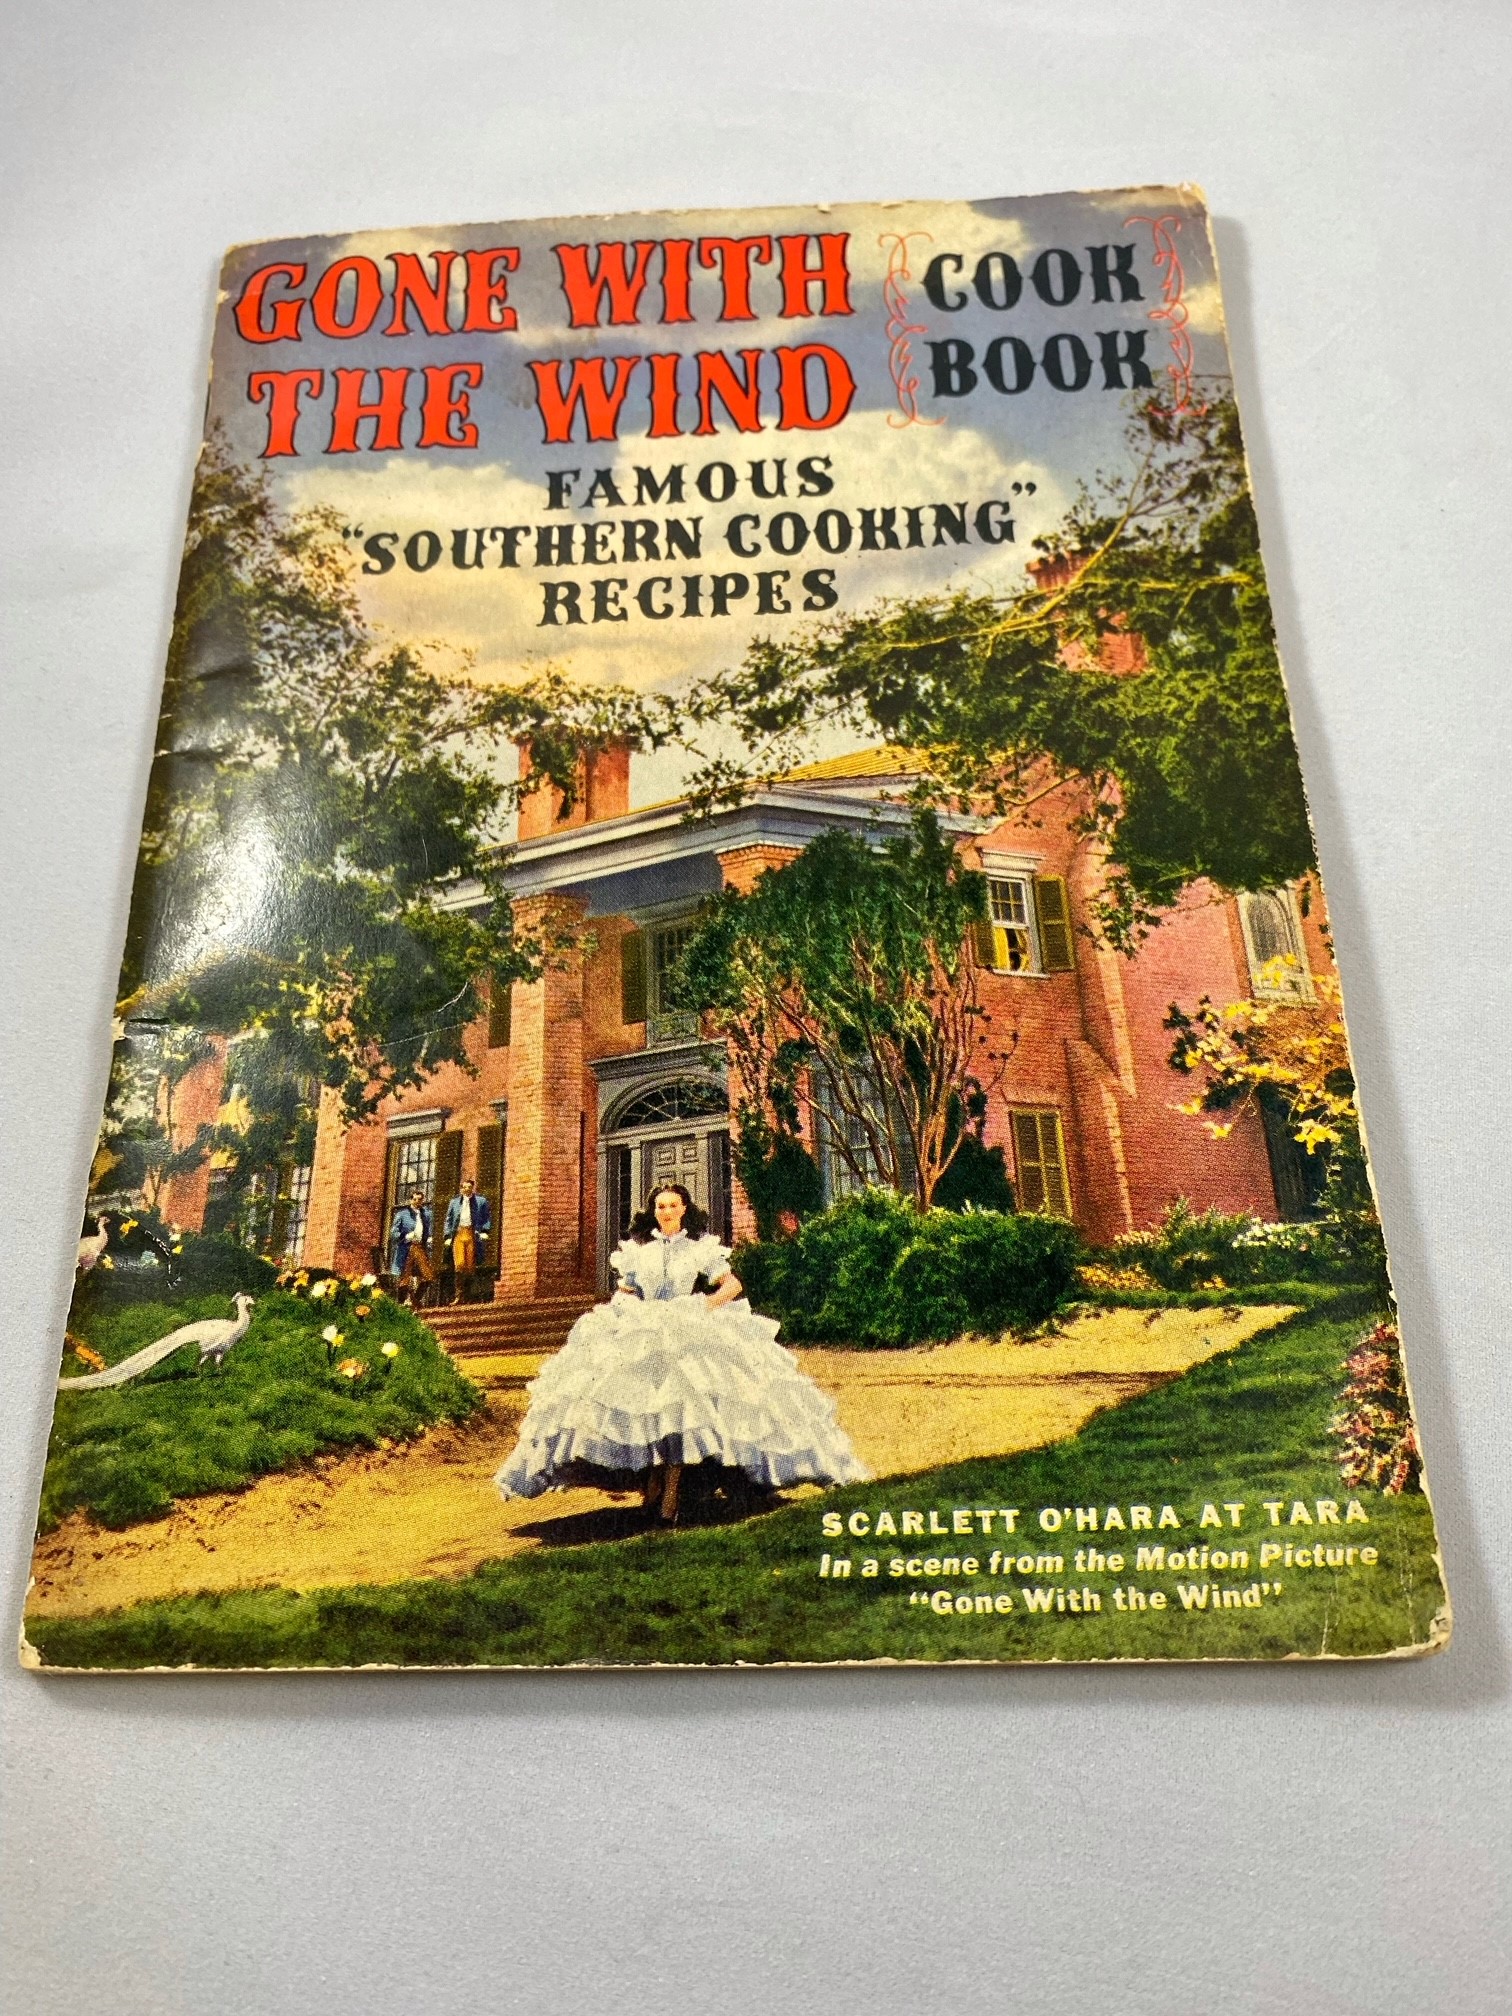 Lot 54: Gone with the Wind Cook Book